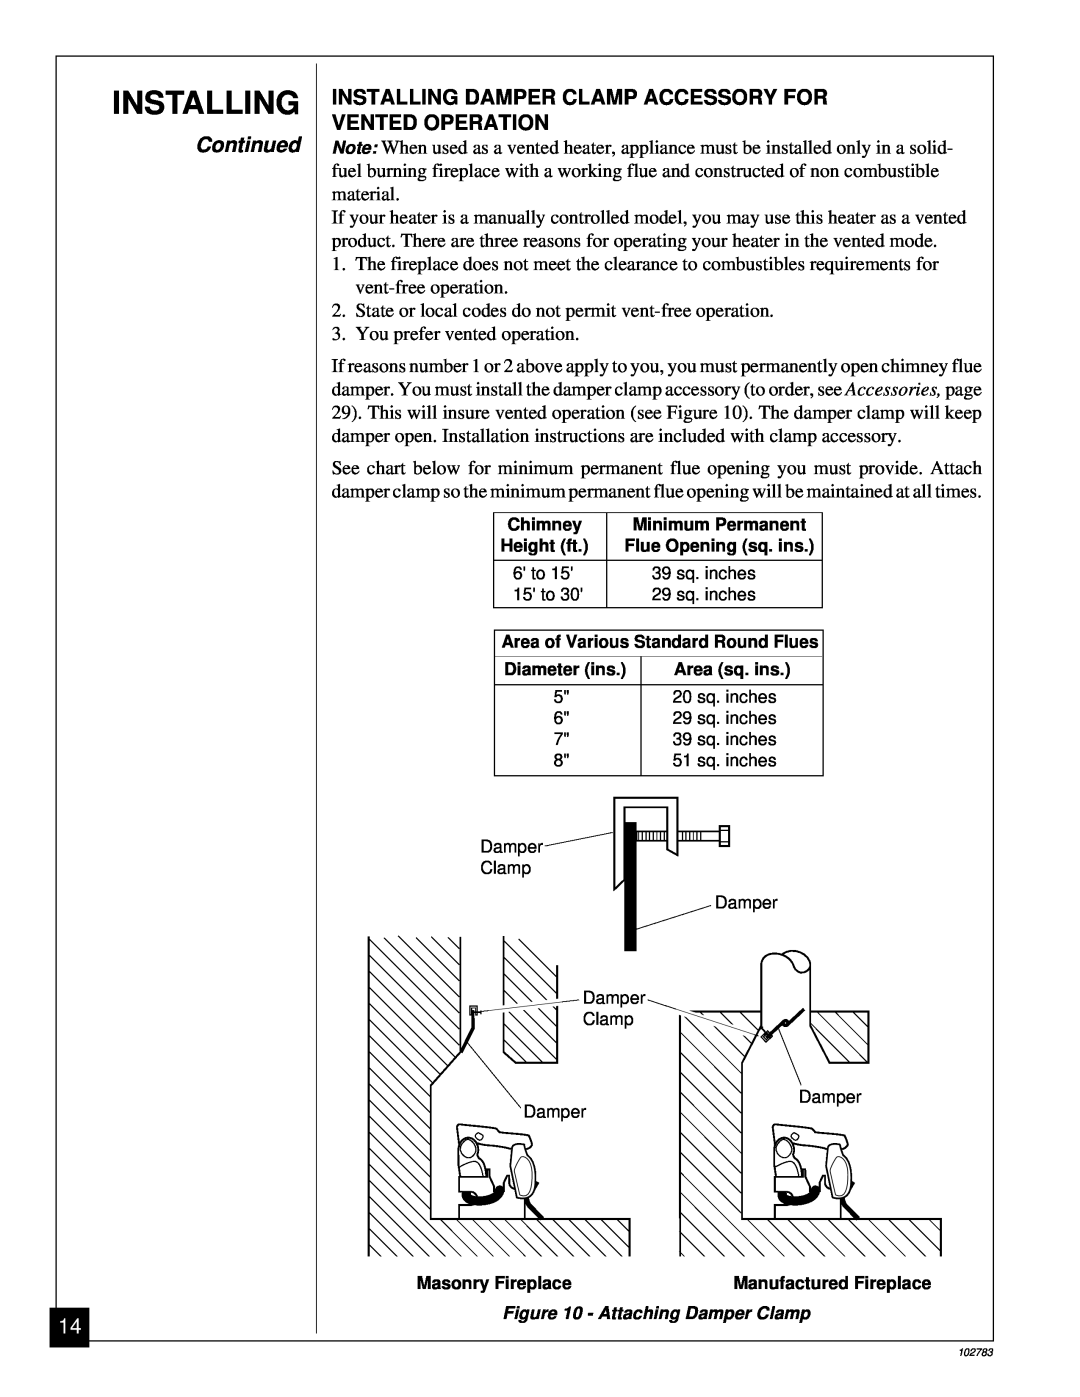 Desa 102783-01B installation manual Installing, Continued, You prefer vented operation 